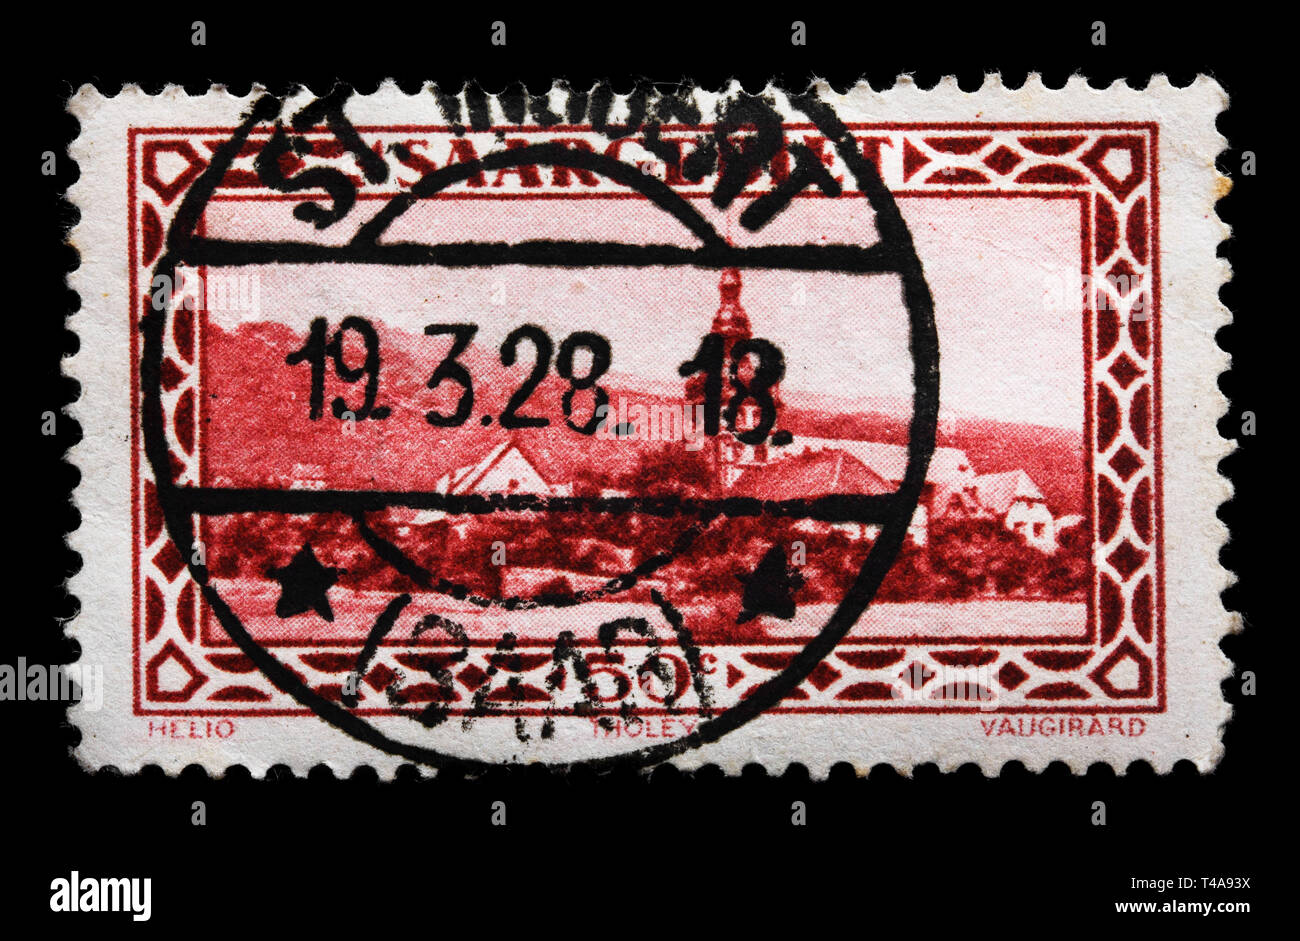 GERMANY - CIRCA 1927: A German Used Postage Stamp showing Saargebiet Tholey, circa 1927 Stock Photo